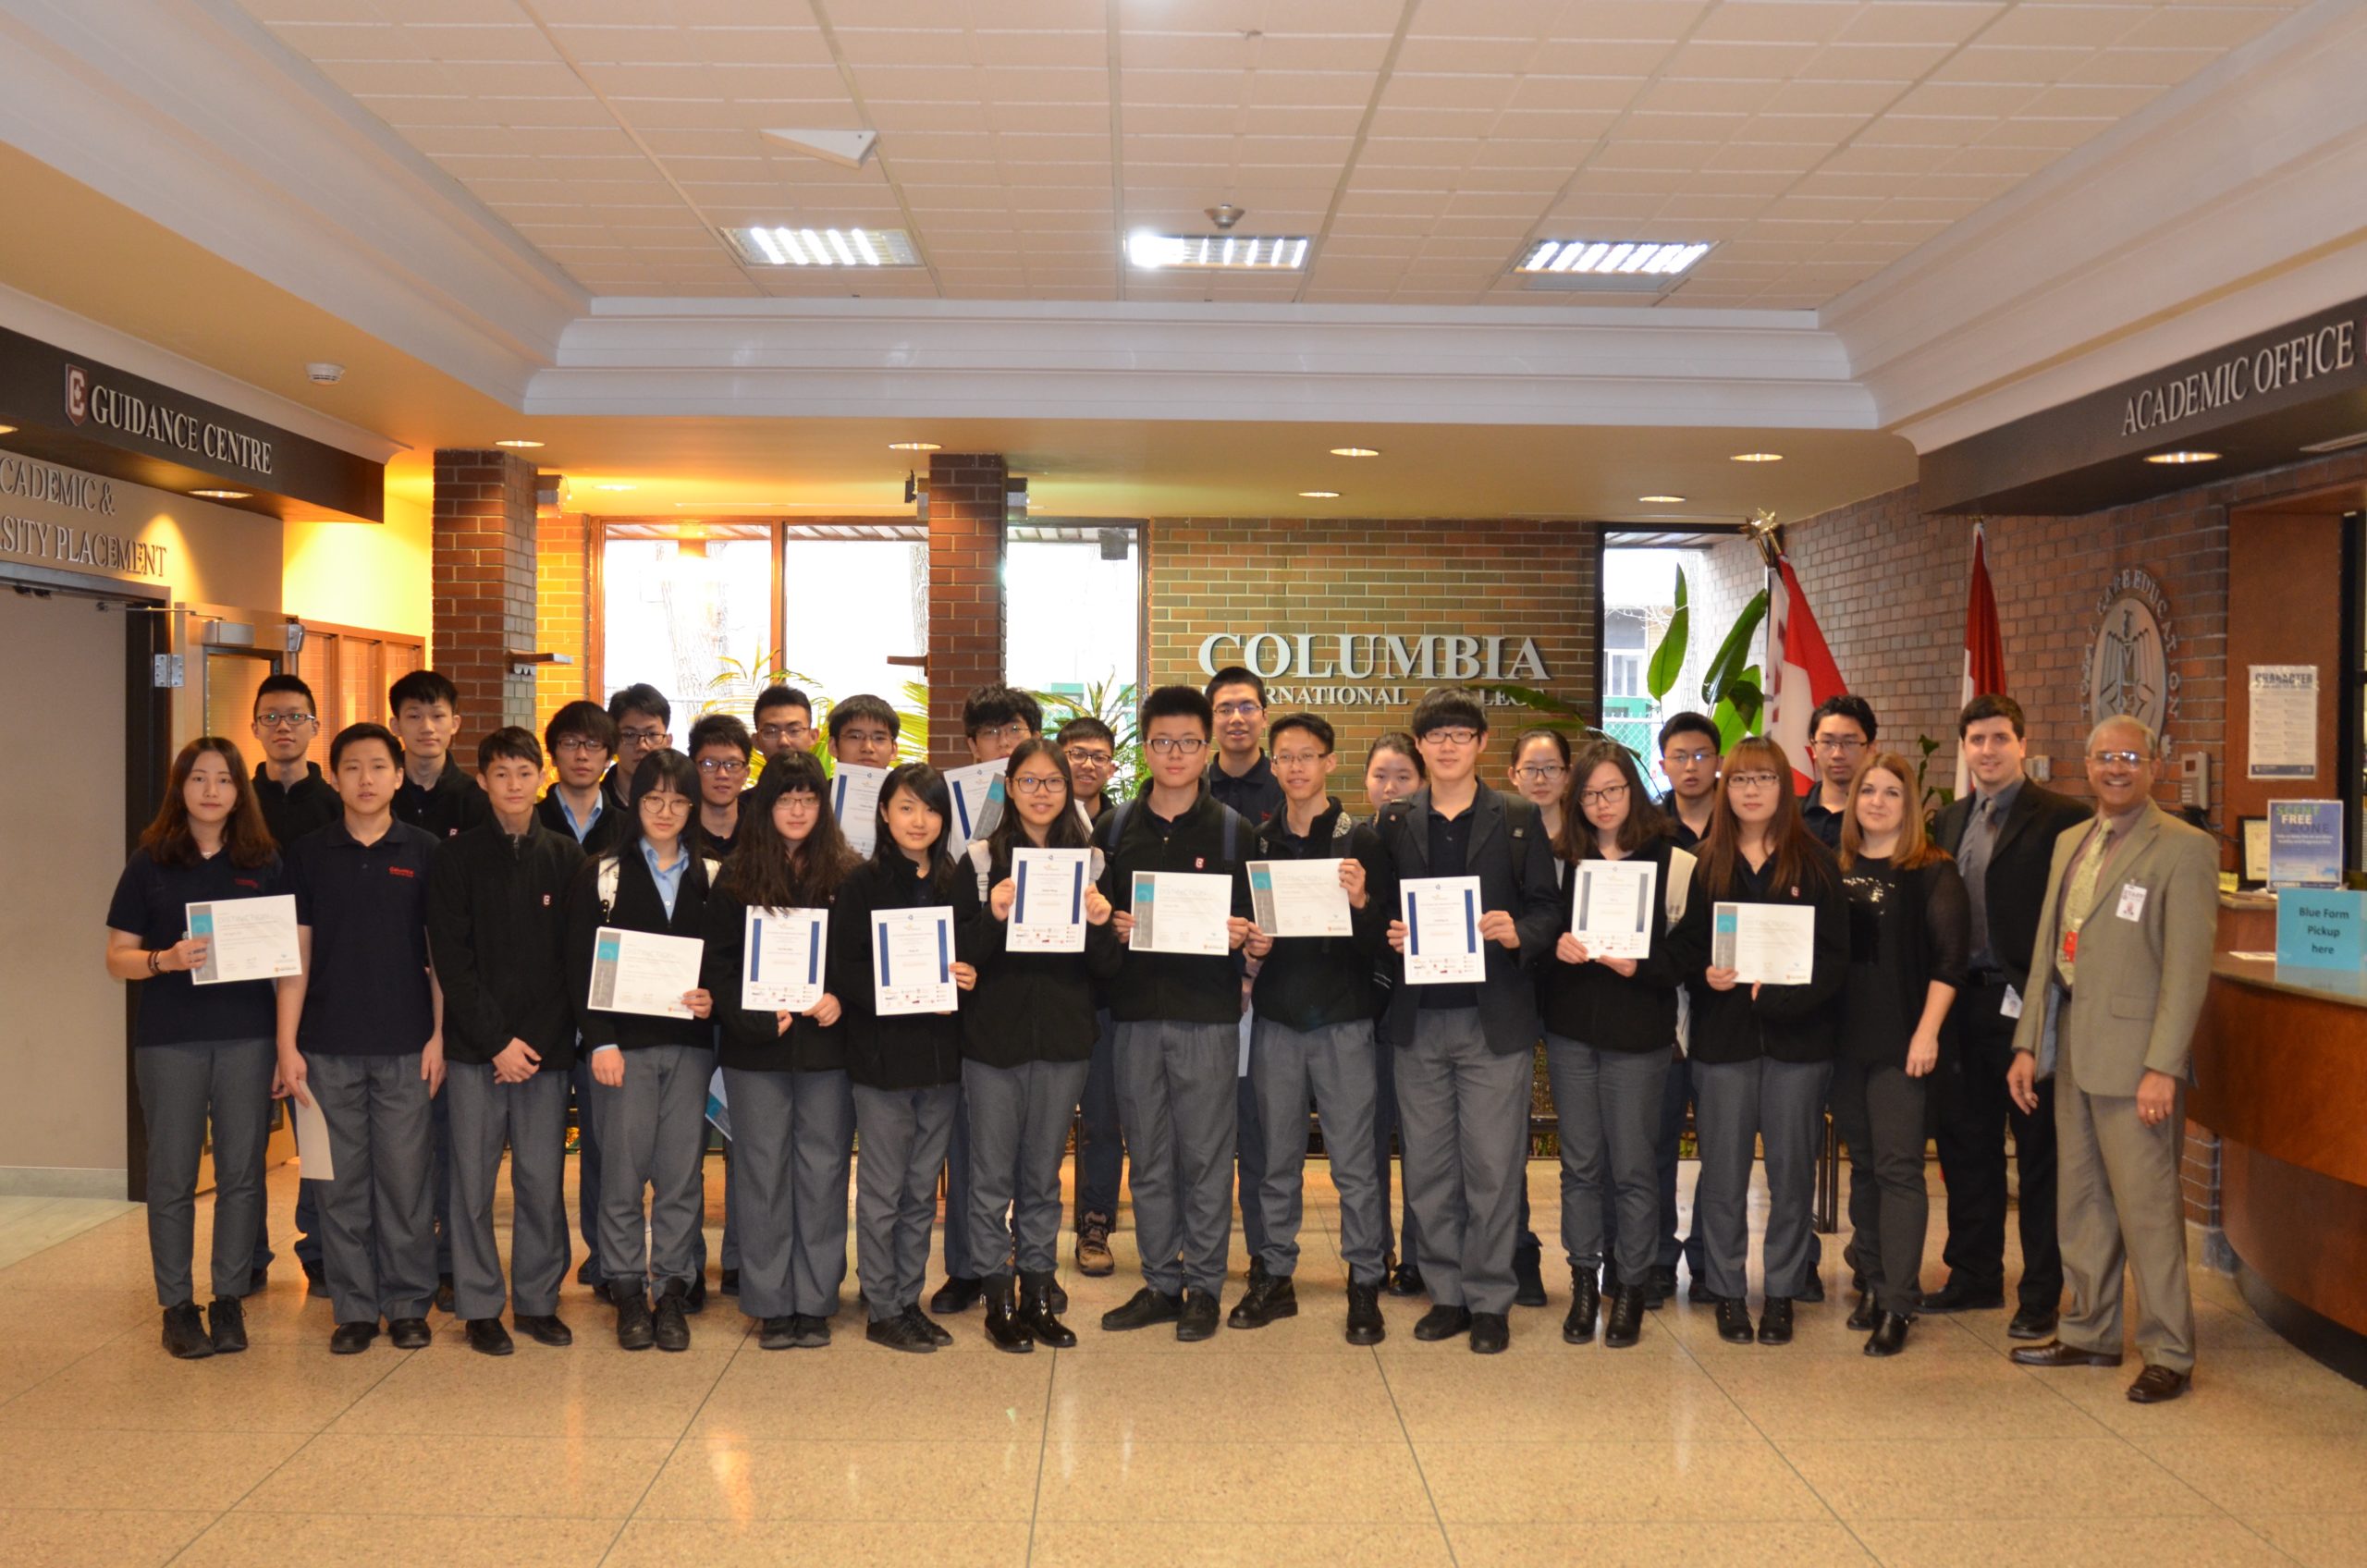 CIC Students with certificates of distinction